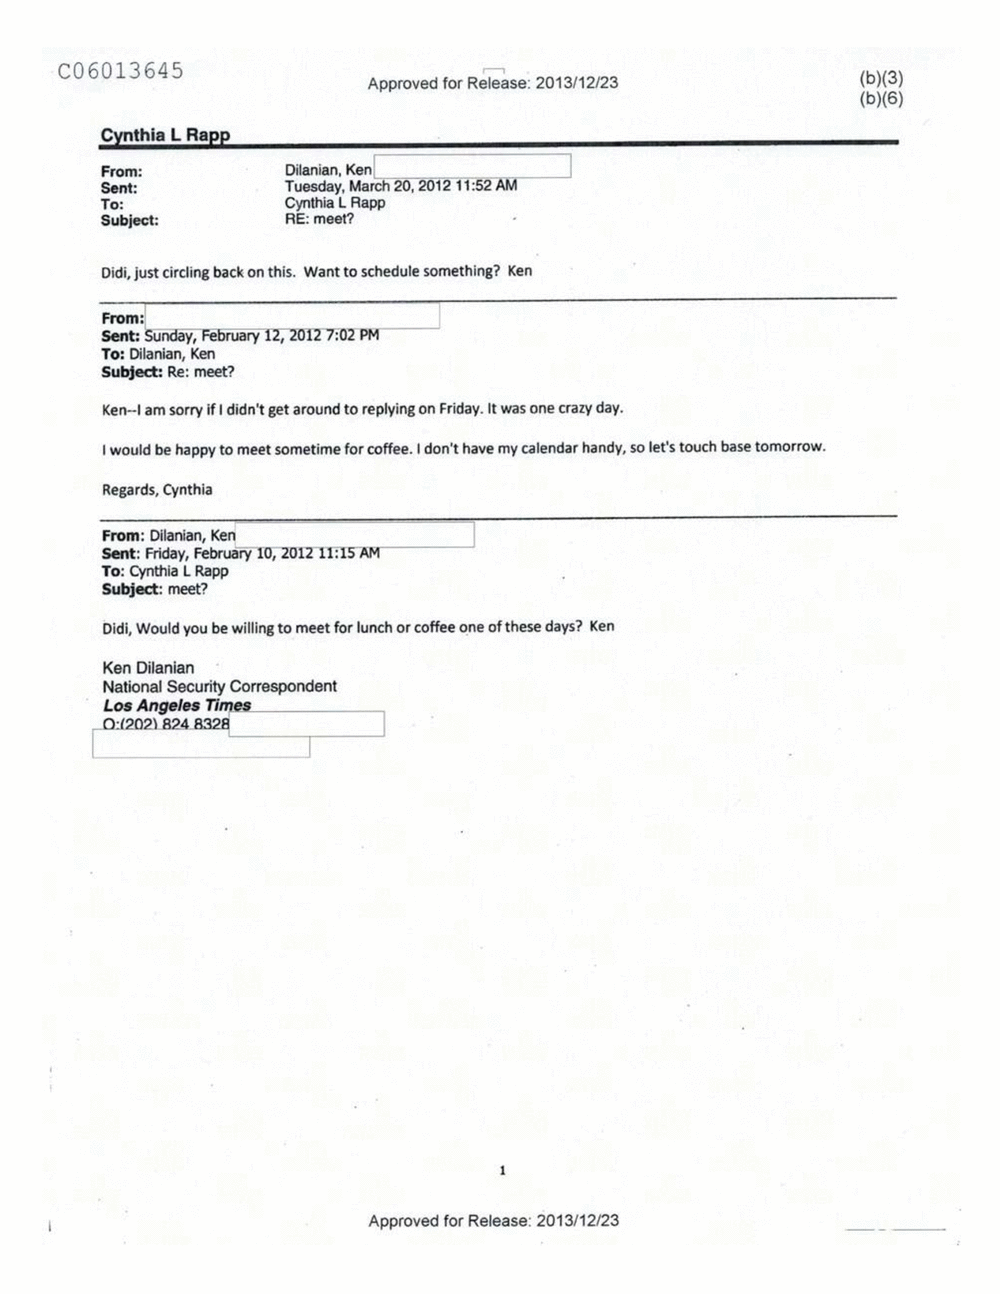 Page 486 from Email Correspondence Between Reporters and CIA Flacks